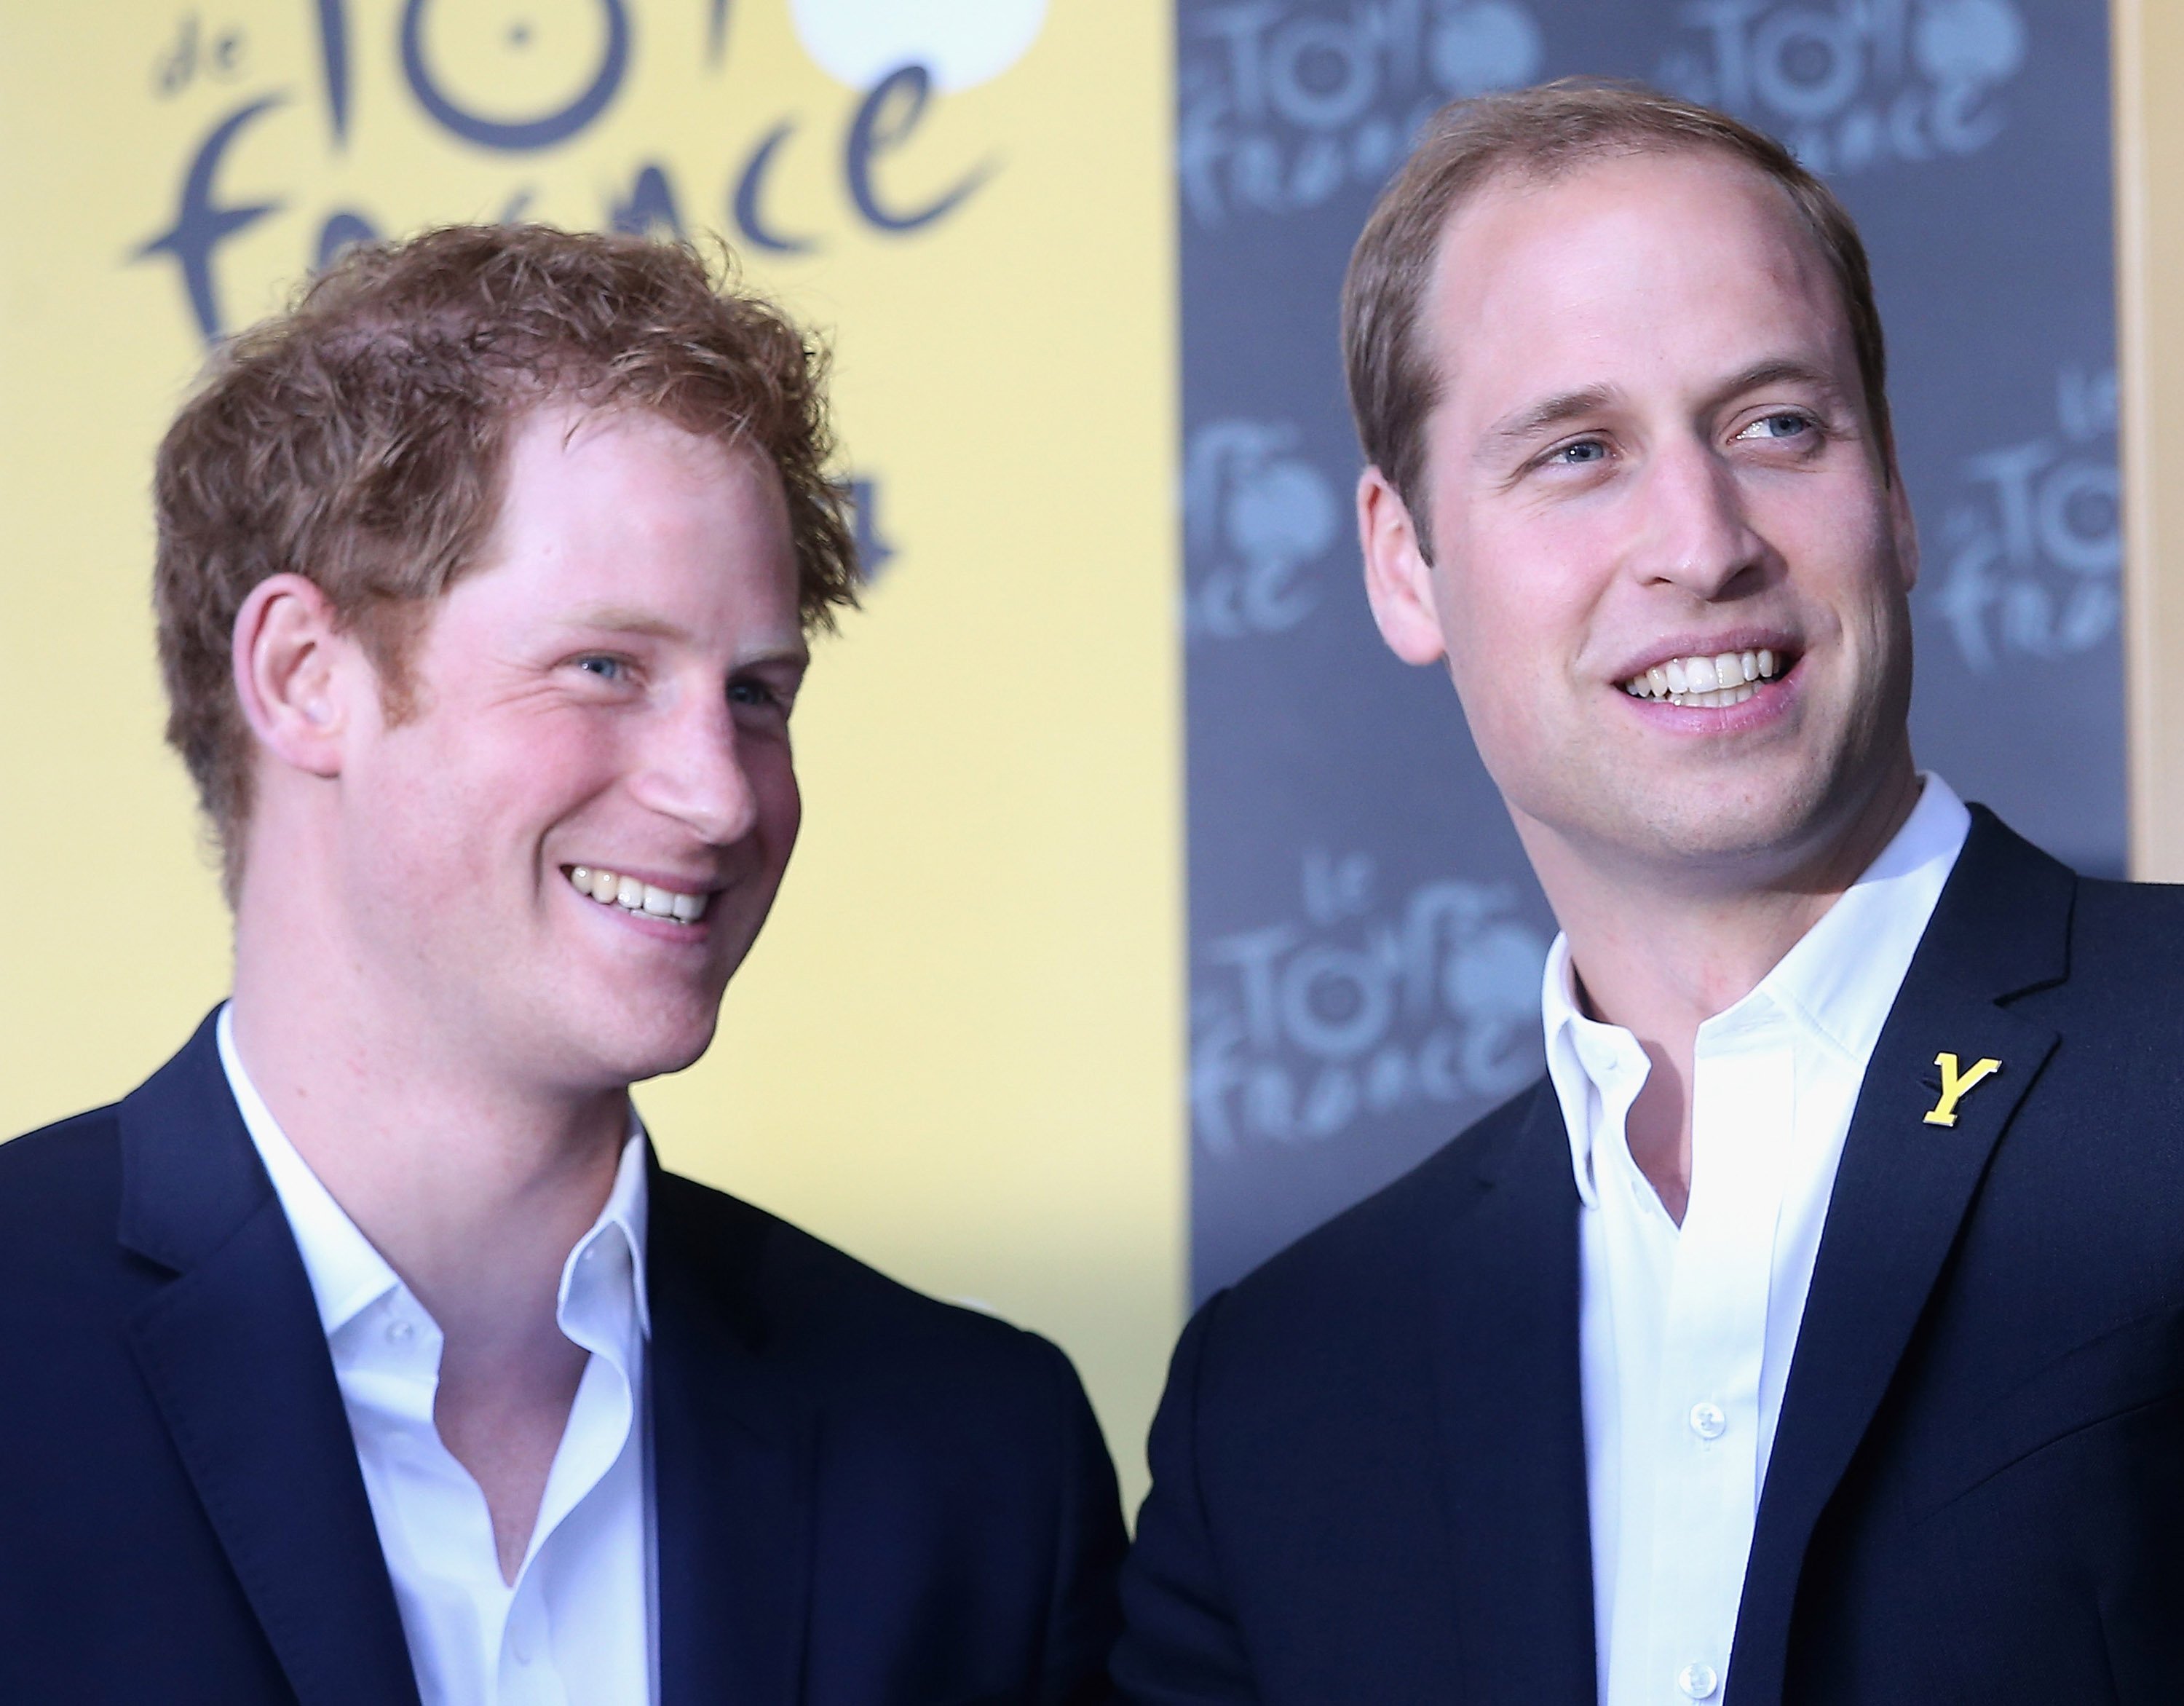 Prince Harry and Prince William pictured laughing together on the podium after Stage 1 of the Tour De France on July 5, 2014 in Harrogate, United Kingdom. / Source: Getty Images